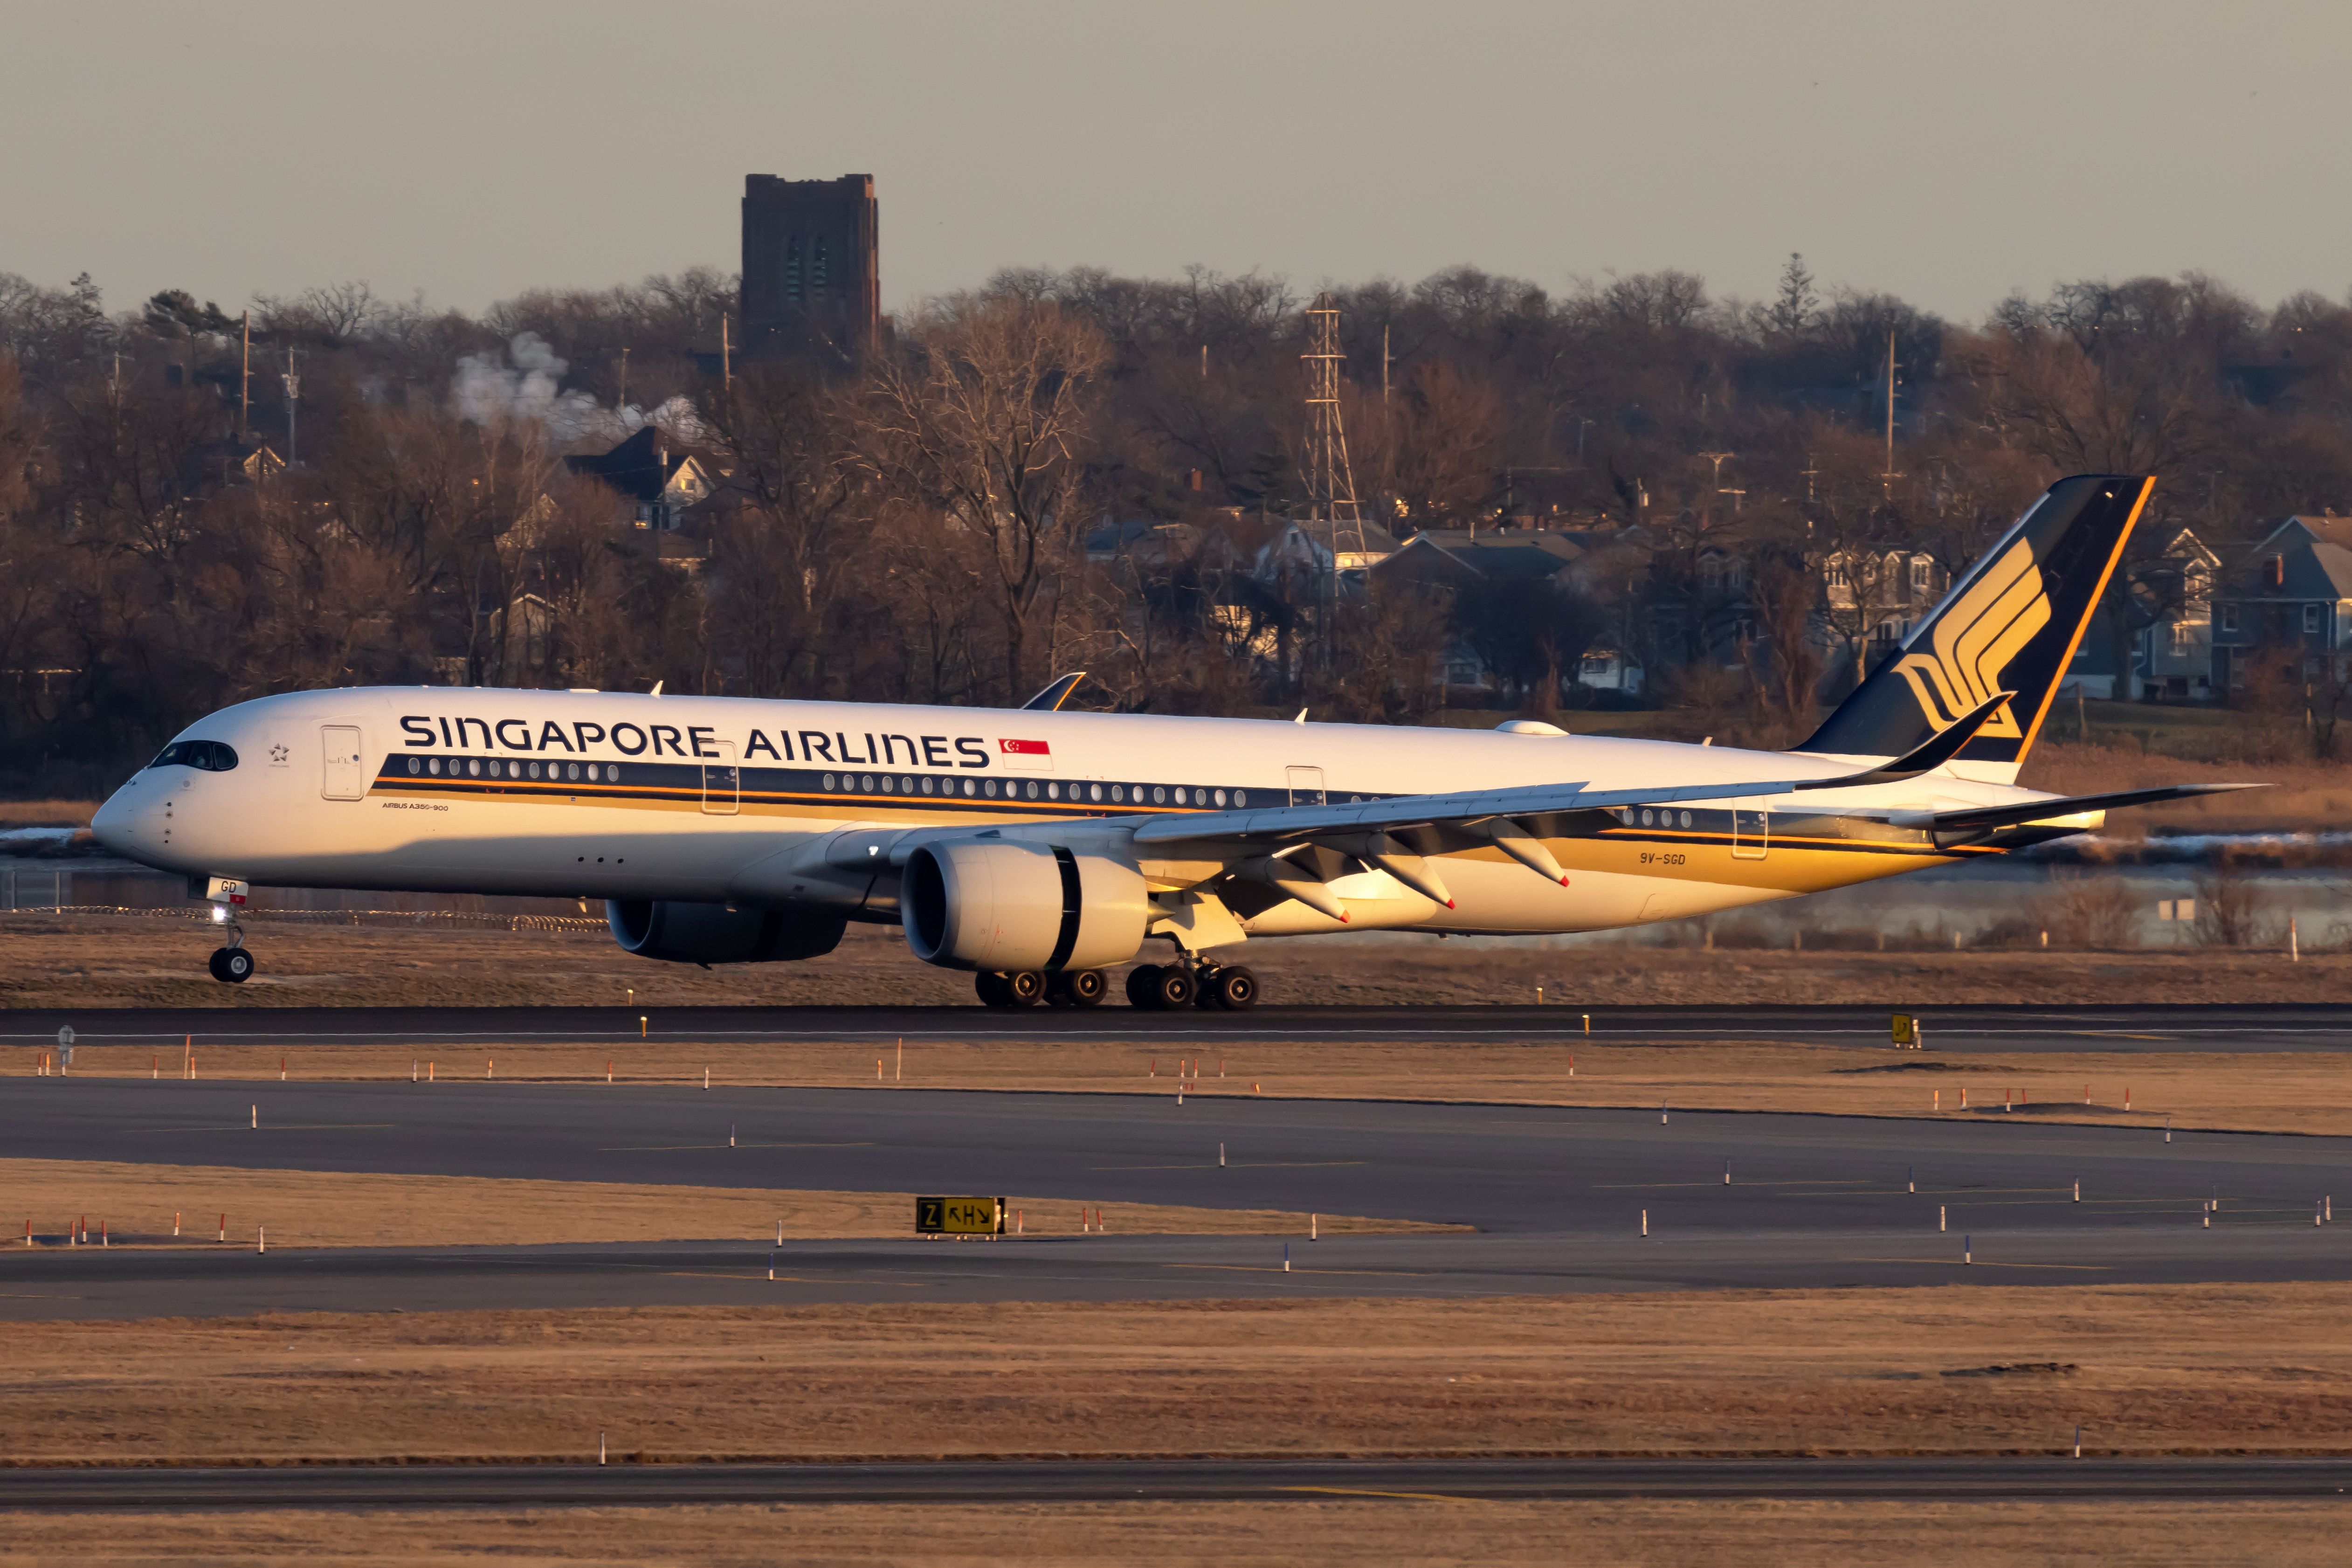 A Singapore Airlines Airbus A350-900 about to take off.